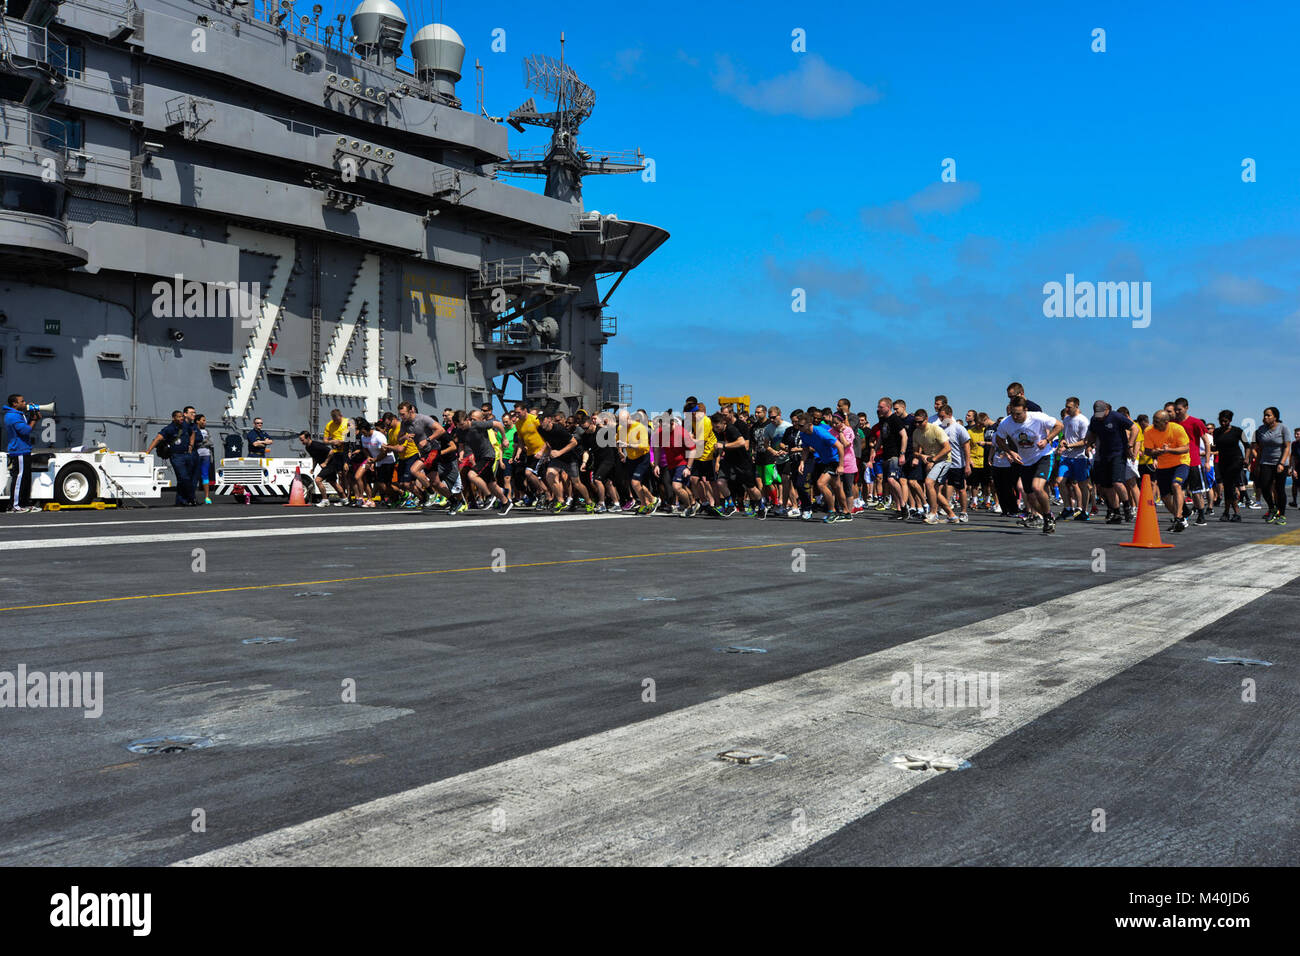 150503-N-IK337-024 PACIFIC OCEAN (May 3, 2015) - Sailors run a 5k on the flight deck of USS John C. Stennis (CVN 74) to raise awareness for the Navy’s Sexual Assault Awareness and Response program.  The ships comprising the John C. Stennis Strike Group (JCSSG) are participating in a Group Sail exercise designed to develop coordinated capabilities. (U.S. Navy Photo by Mass Communication Specialist Seaman Christopher Frost / Released) 150503-N-IK337-024 by USS John C. Stennis (CVN 74) Official Stock Photo